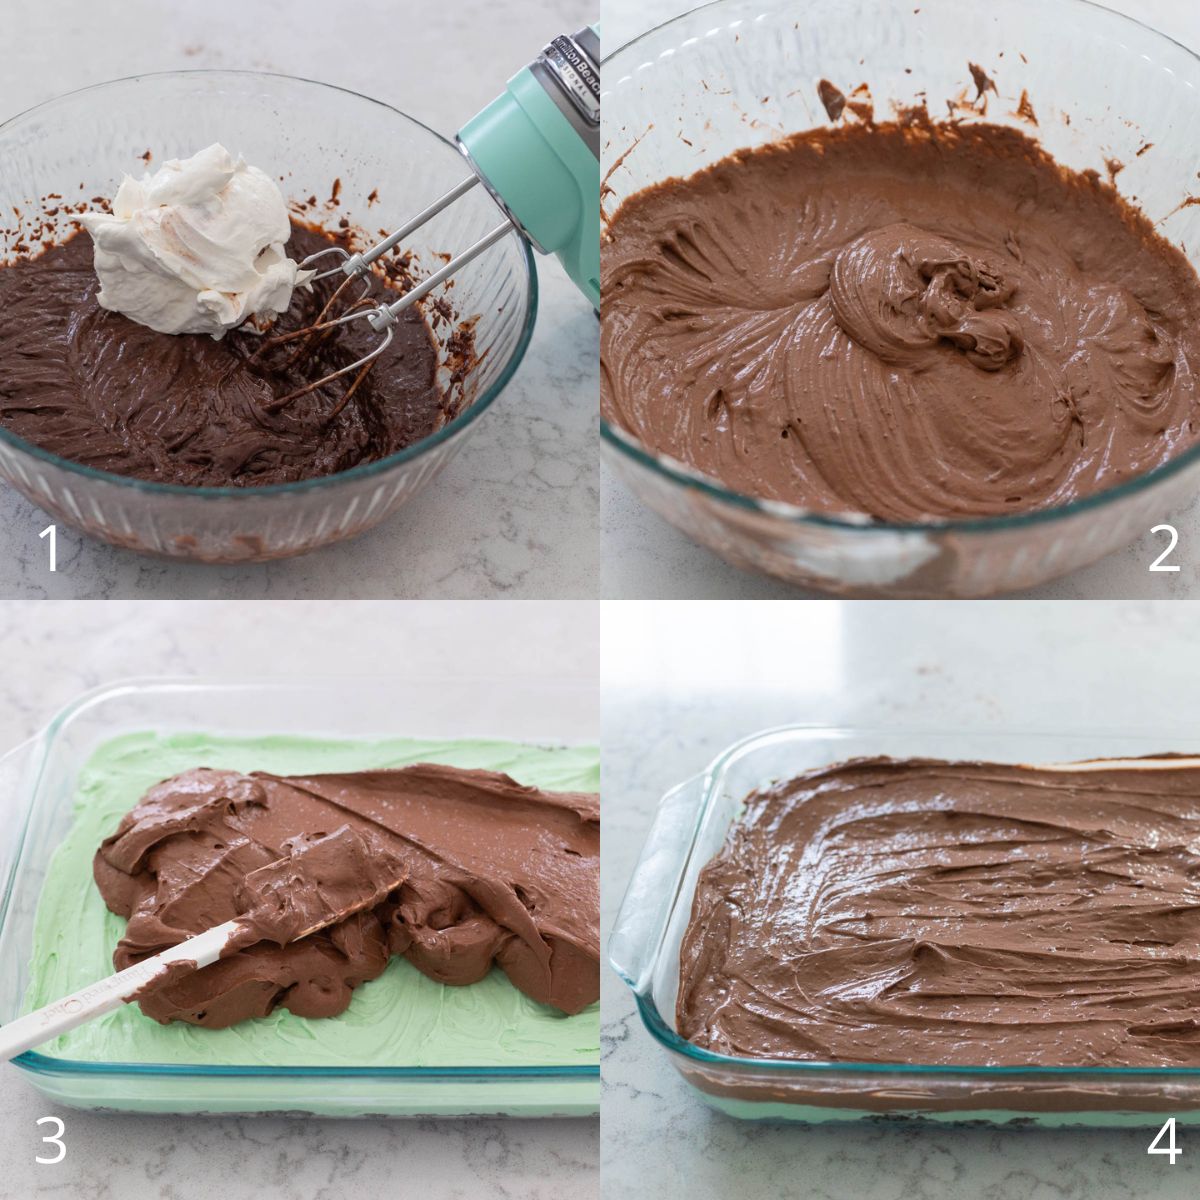 The step by step photos show how to make the chocolate pudding layer and spread it over the mint layer.